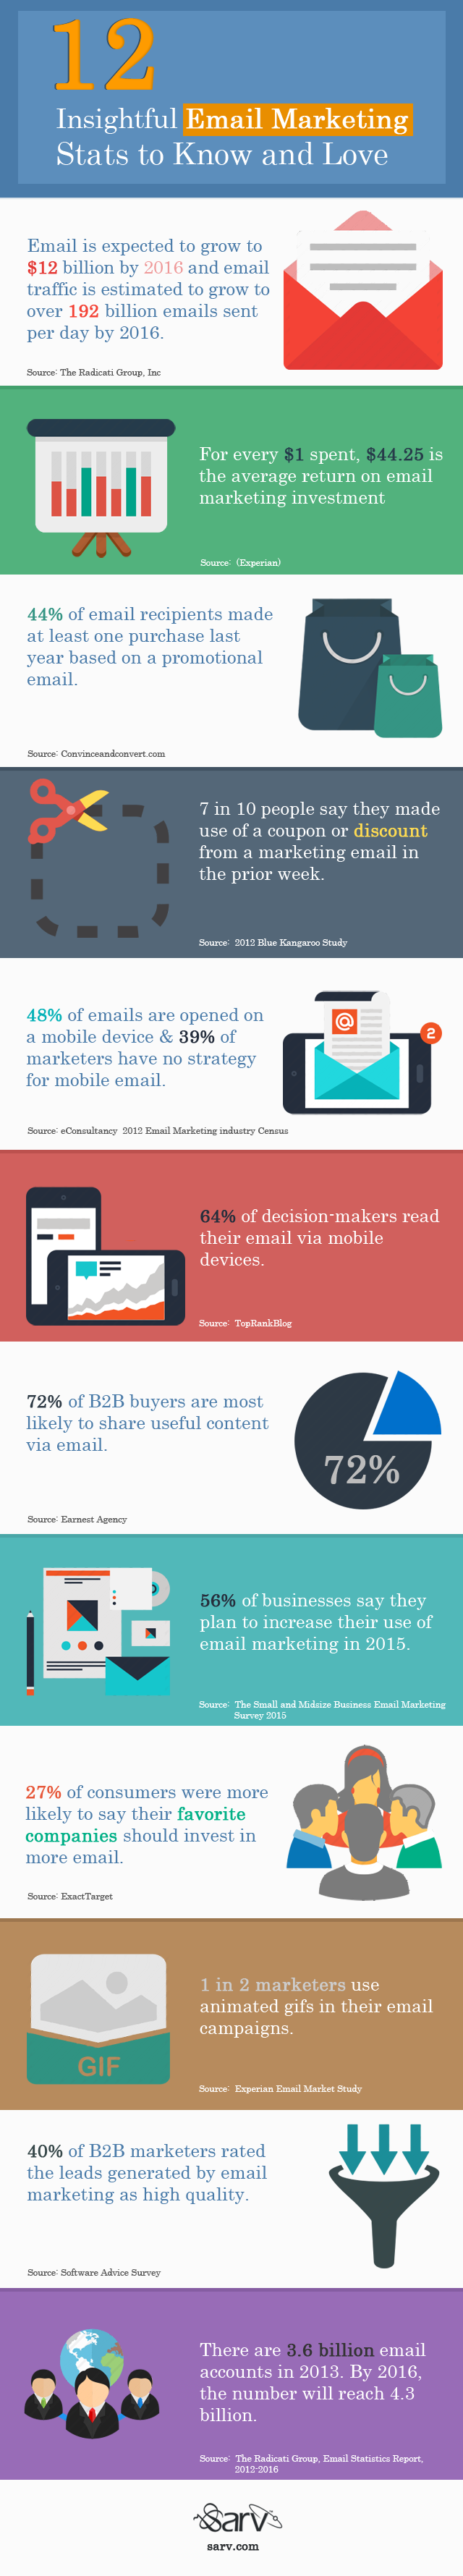 12-Insightful-email-marketing-stats-to-know-and-love